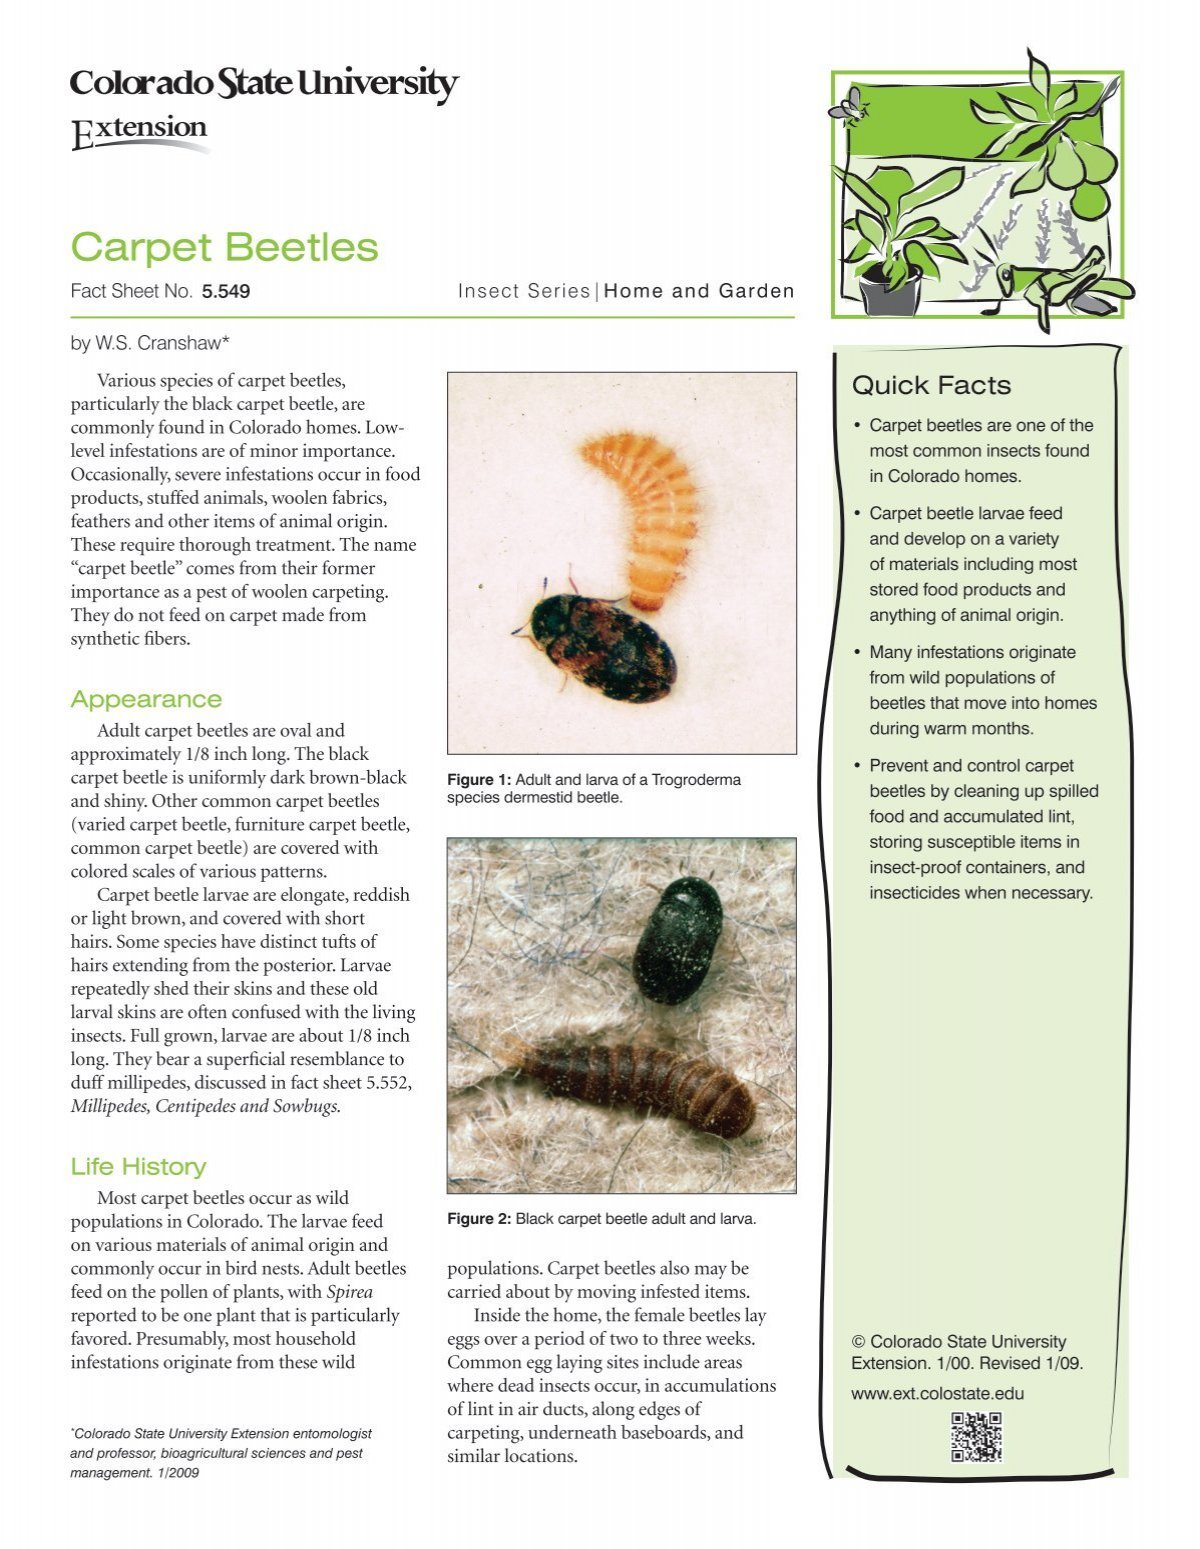 Carpet Beetle Life Cycle: Understanding and Managing These